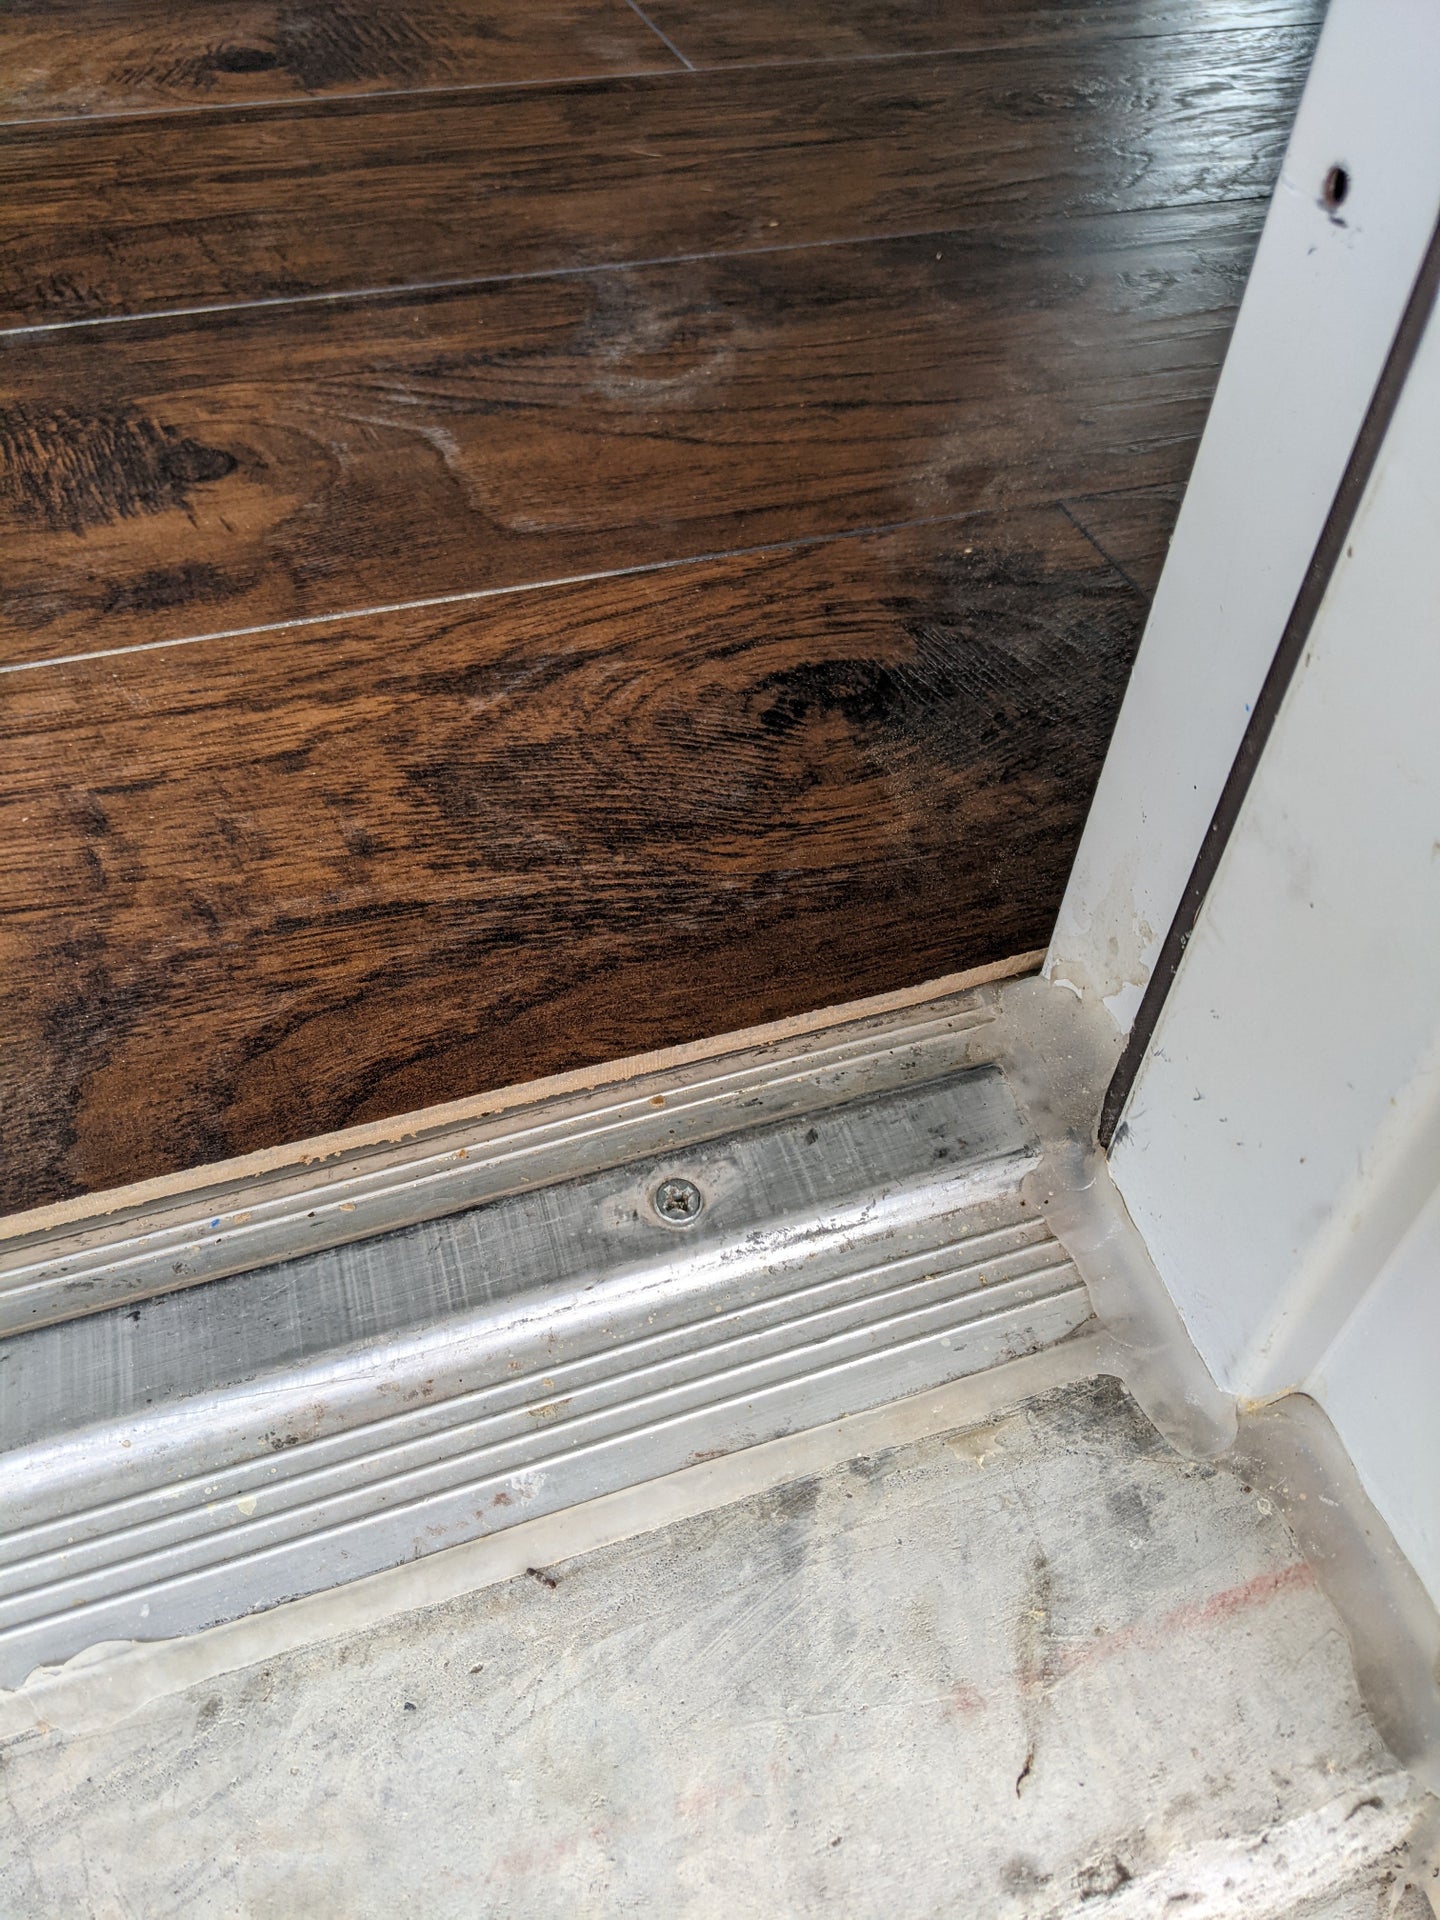 Threshold Issue With New Laminate